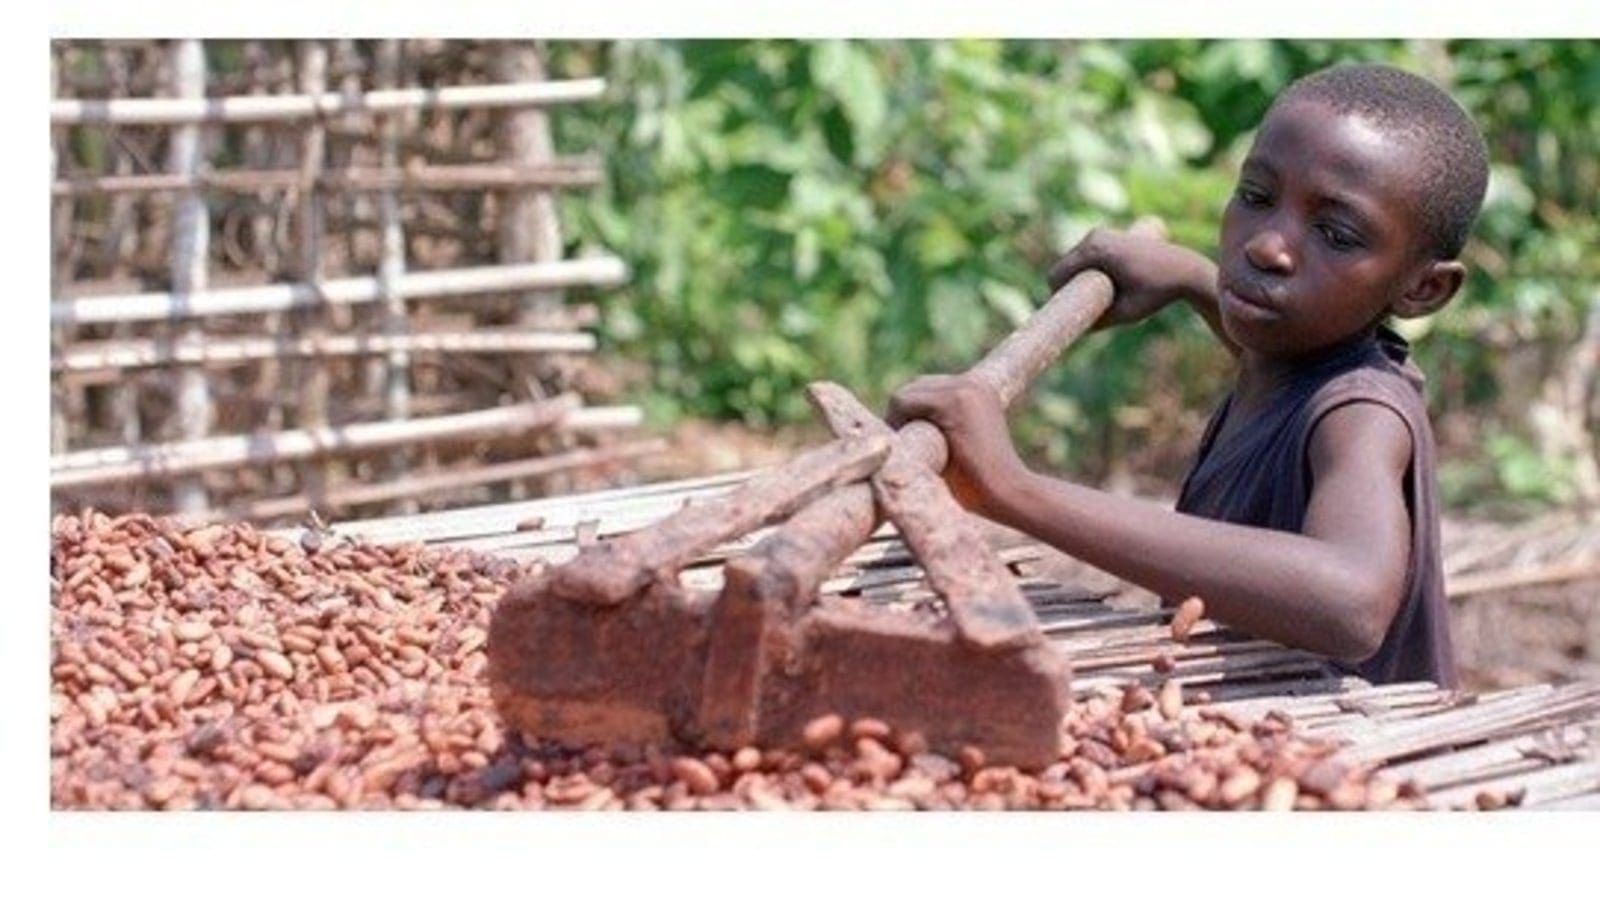 Olam Food Ingredients establishes systems to rid cocoa supply systems of child labour and deforestation